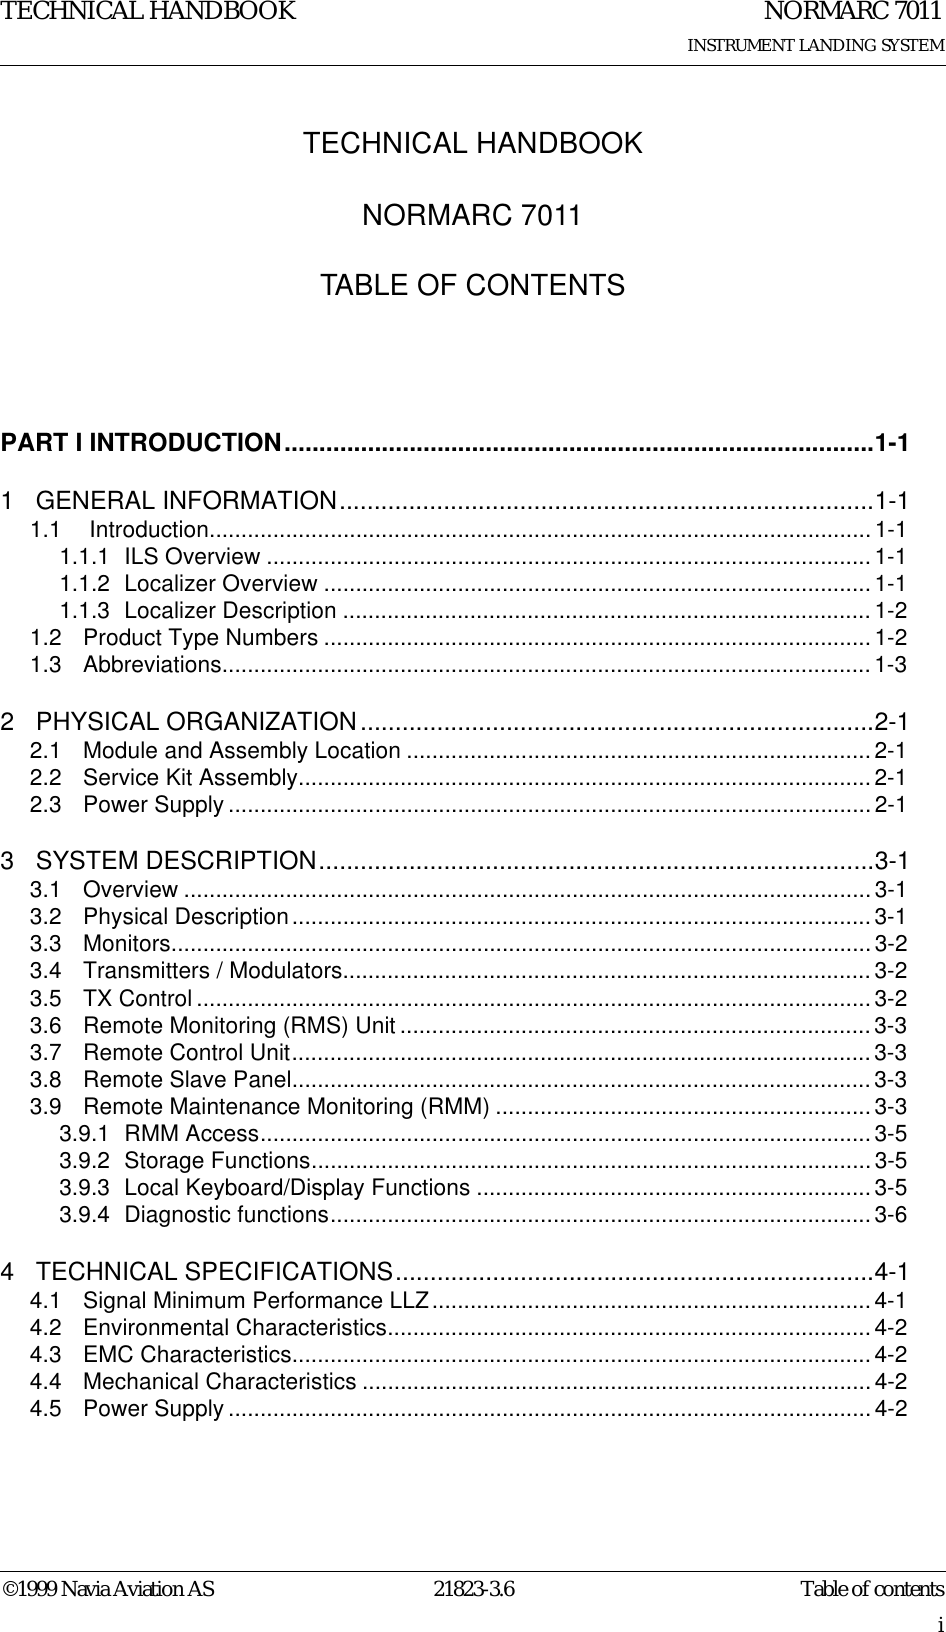 TECHNICAL HANDBOOK©1999 Navia Aviation AS 21823-3.6iTECHNICAL HANDBOOKNORMARC 7011TABLE OF CONTENTSNORMARC 7011INSTRUMENT LANDING SYSTEMTable of contentsPART I INTRODUCTION.....................................................................................1-11 GENERAL INFORMATION.............................................................................1-11.1  Introduction........................................................................................................1-11.1.1 ILS Overview ............................................................................................... 1-11.1.2 Localizer Overview ...................................................................................... 1-11.1.3 Localizer Description ................................................................................... 1-21.2 Product Type Numbers ...................................................................................... 1-21.3 Abbreviations...................................................................................................... 1-32 PHYSICAL ORGANIZATION..........................................................................2-12.1 Module and Assembly Location .........................................................................2-12.2 Service Kit Assembly..........................................................................................2-12.3 Power Supply .....................................................................................................2-13 SYSTEM DESCRIPTION................................................................................3-13.1 Overview ............................................................................................................ 3-13.2 Physical Description........................................................................................... 3-13.3 Monitors.............................................................................................................. 3-23.4 Transmitters / Modulators...................................................................................3-23.5 TX Control .......................................................................................................... 3-23.6 Remote Monitoring (RMS) Unit .......................................................................... 3-33.7 Remote Control Unit........................................................................................... 3-33.8 Remote Slave Panel........................................................................................... 3-33.9 Remote Maintenance Monitoring (RMM) ...........................................................3-33.9.1 RMM Access................................................................................................ 3-53.9.2 Storage Functions........................................................................................3-53.9.3 Local Keyboard/Display Functions ..............................................................3-53.9.4 Diagnostic functions.....................................................................................3-64 TECHNICAL SPECIFICATIONS.....................................................................4-14.1 Signal Minimum Performance LLZ.....................................................................4-14.2 Environmental Characteristics............................................................................ 4-24.3 EMC Characteristics........................................................................................... 4-24.4 Mechanical Characteristics ................................................................................4-24.5 Power Supply .....................................................................................................4-2